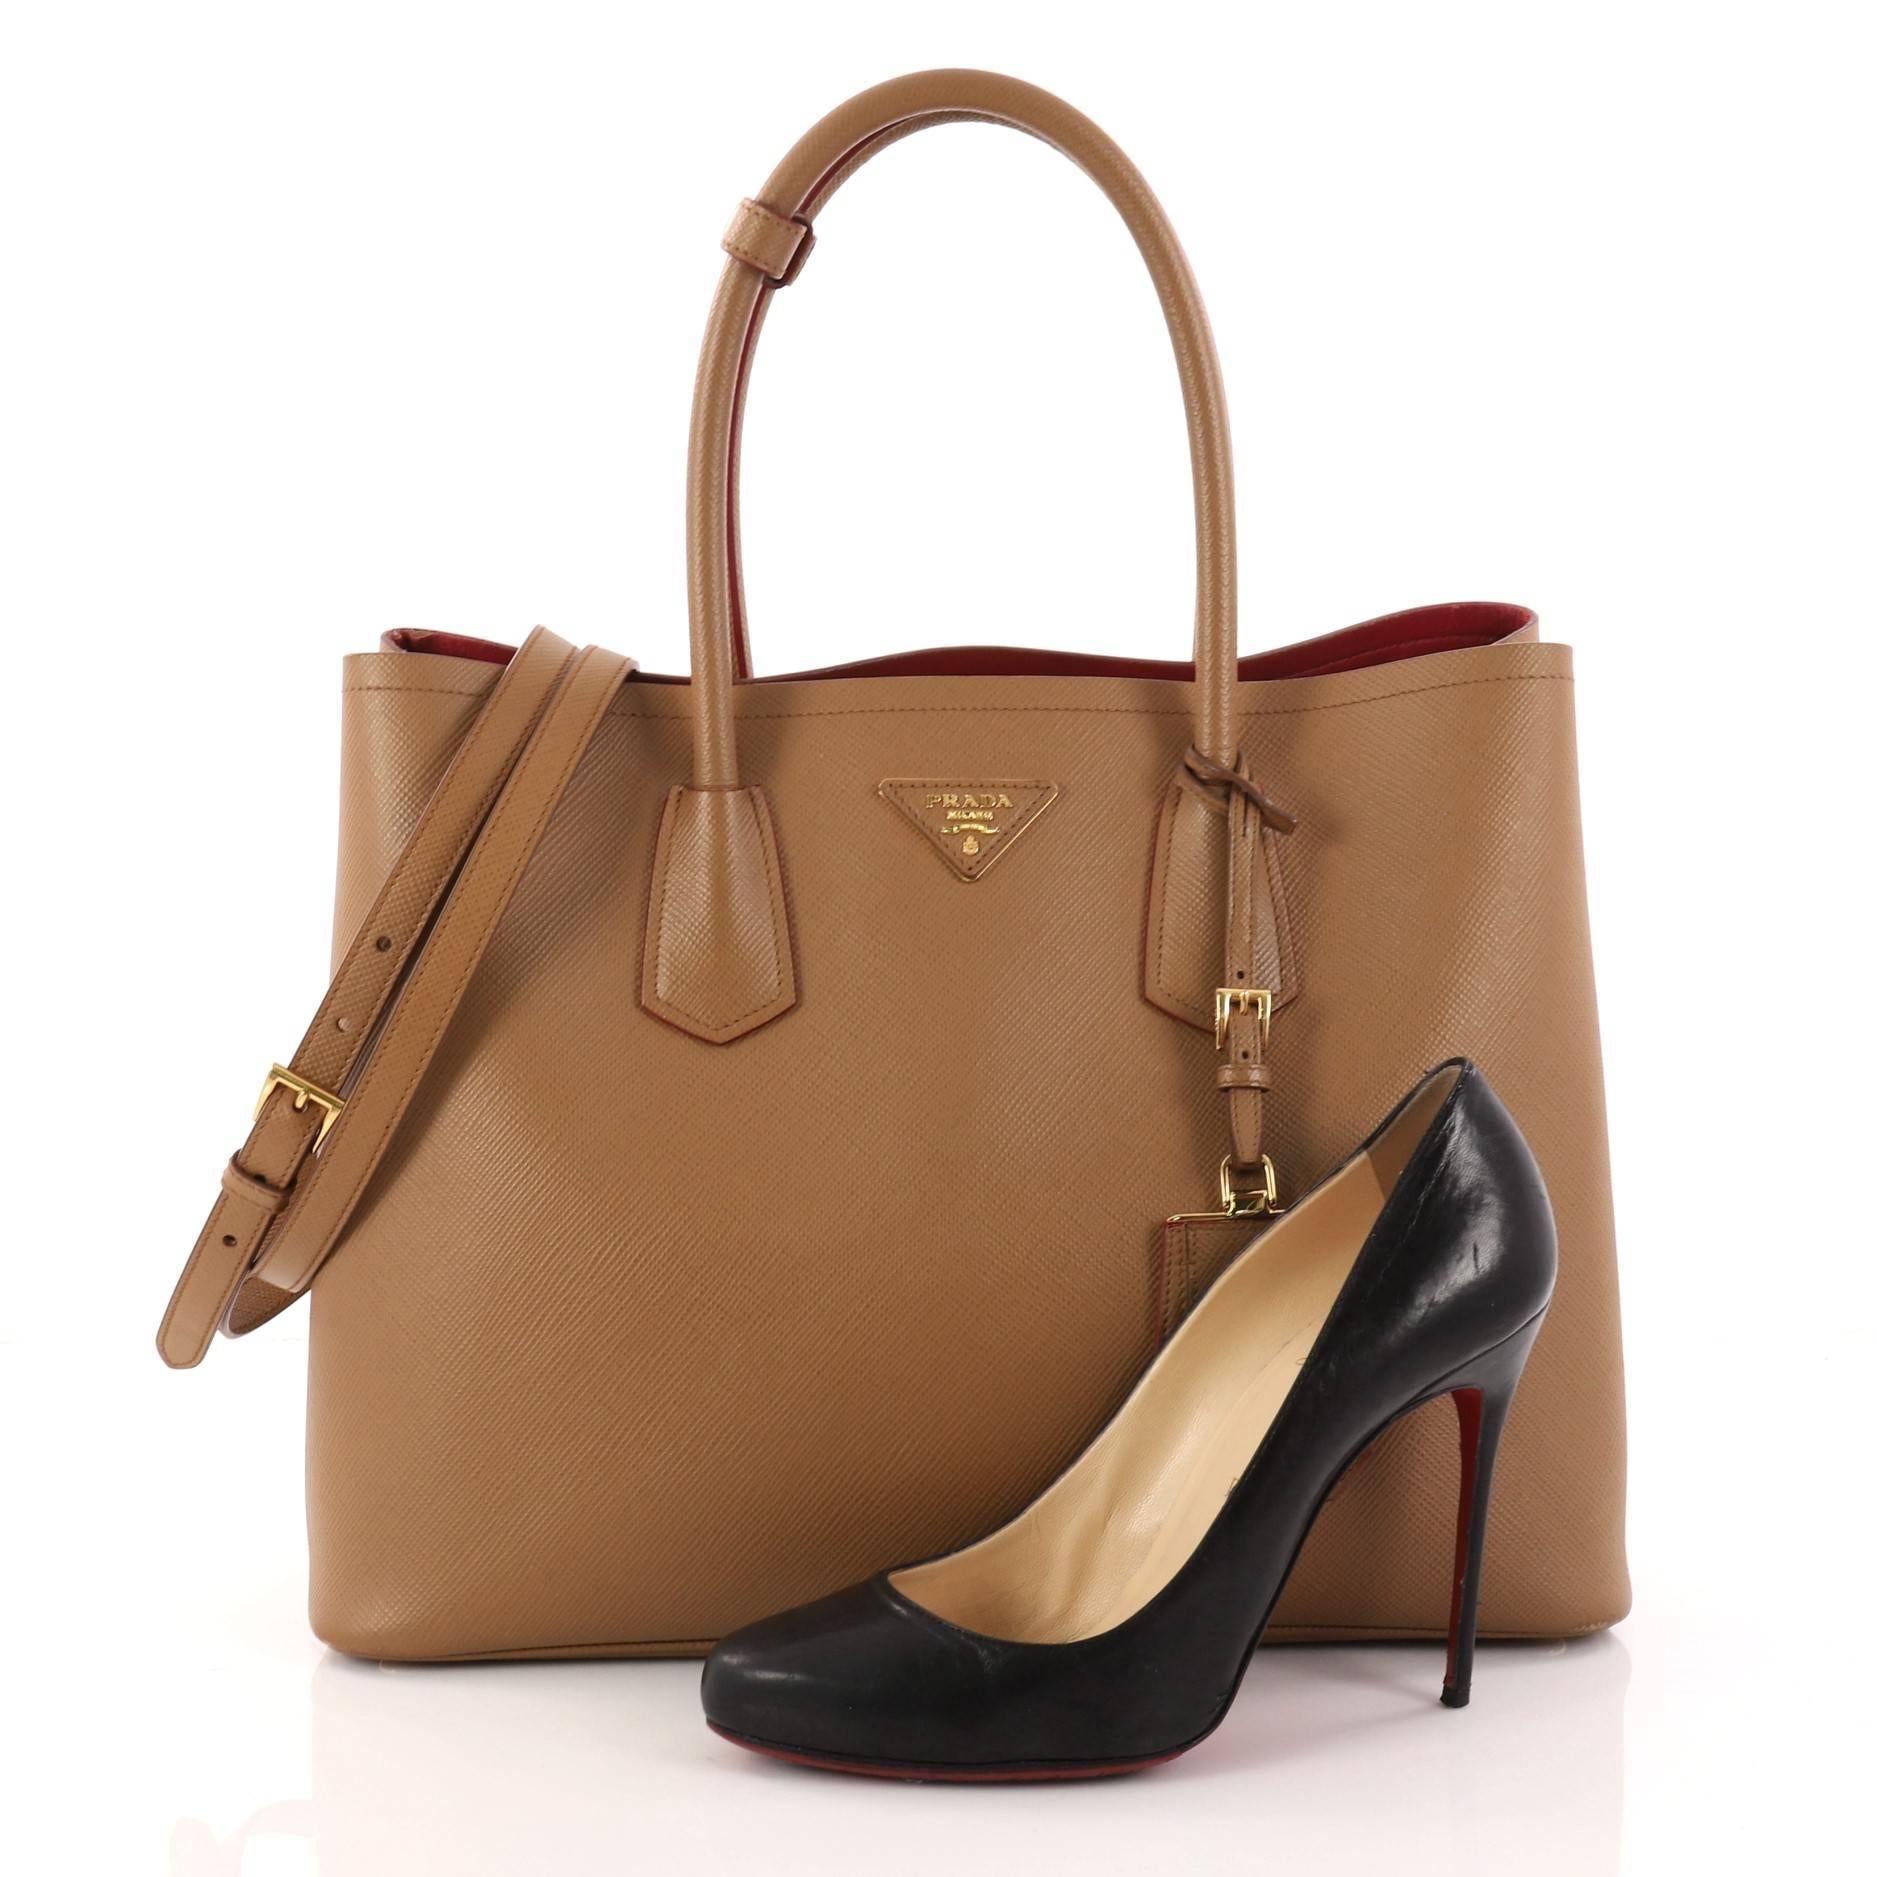 This authentic Prada Cuir Double Tote Saffiano Leather Medium is elegant in its simplicity and structure. Crafted from brown saffiano leather, this tote features dual-rolled handles, side snap buttons, Prada's trademark triangle logo at the center,